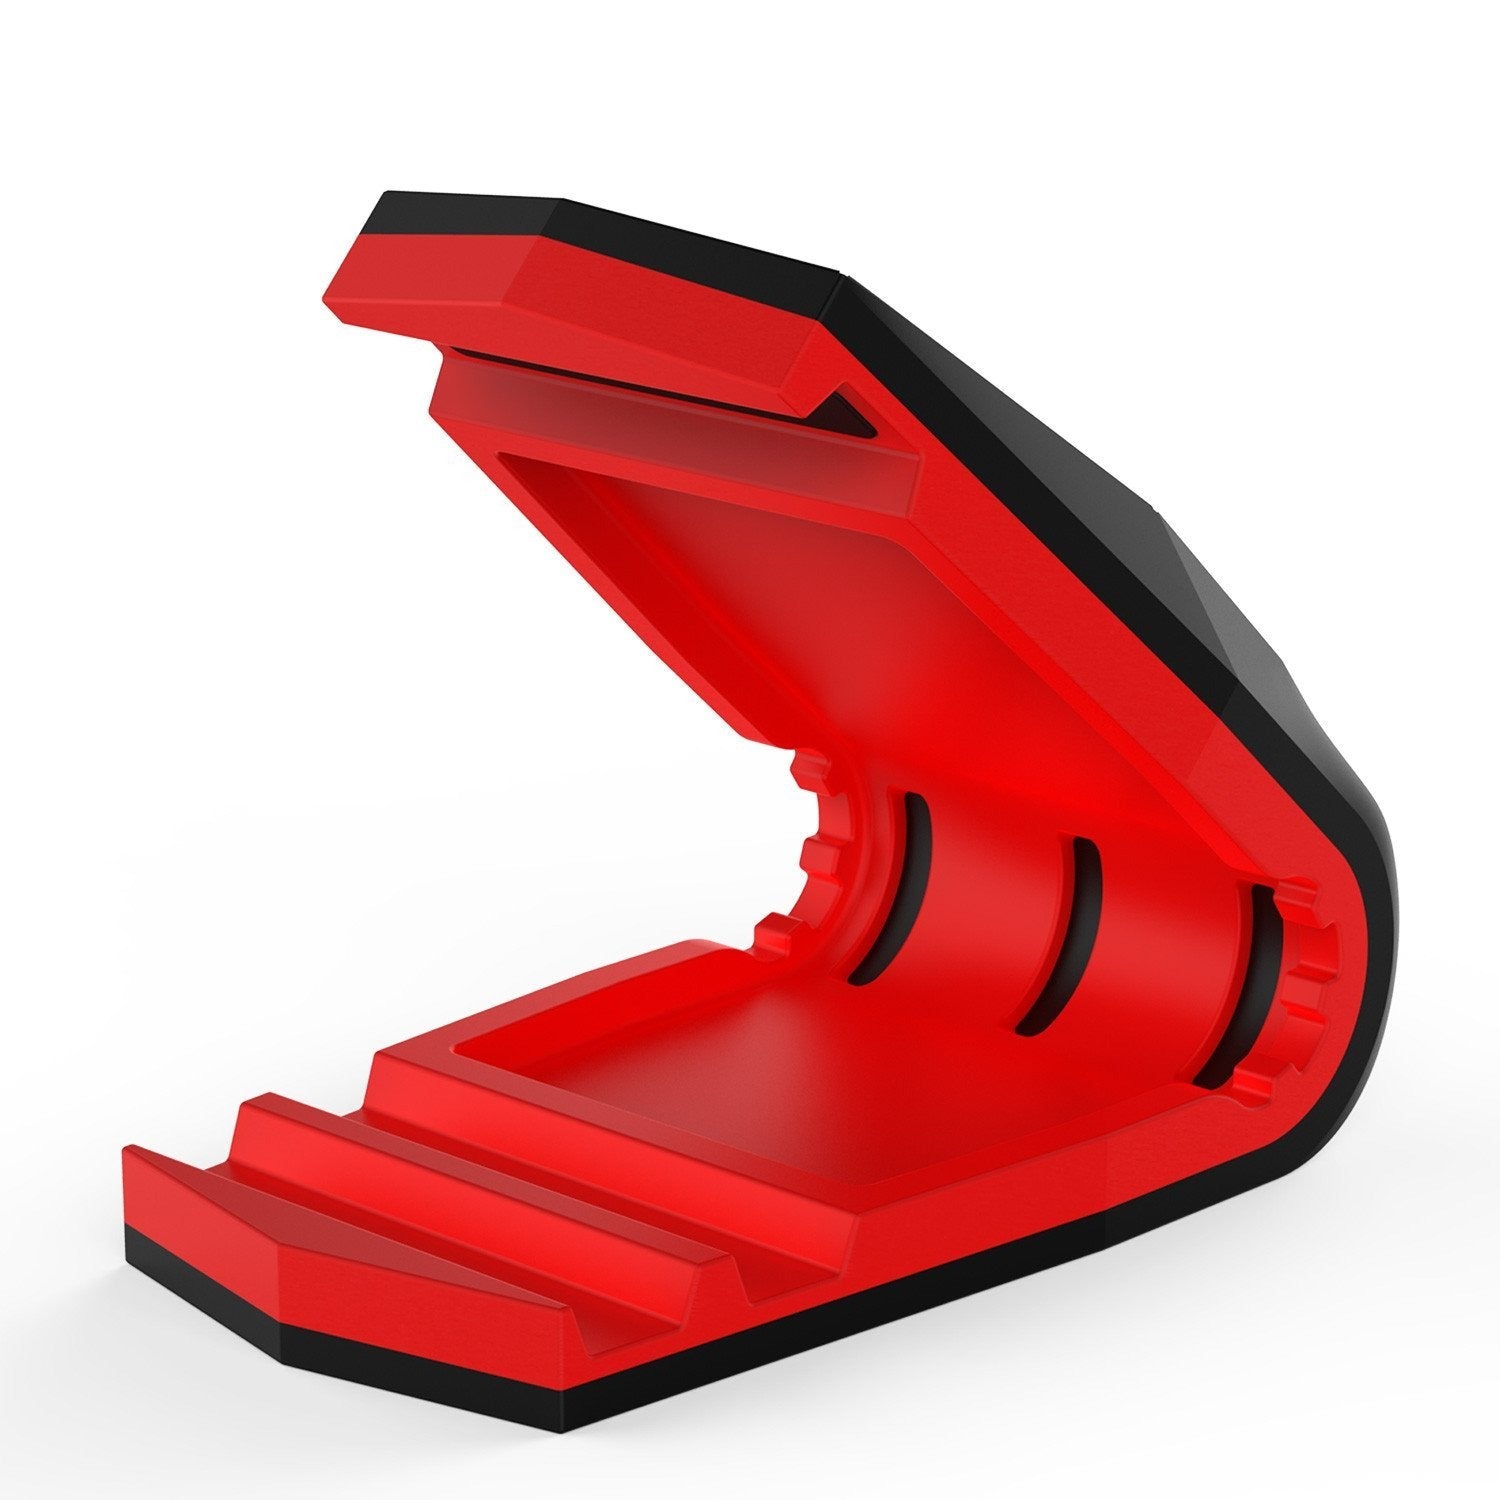 Viper Car Phone Holder Red, Universal Dashboard Mount for all Smartphones